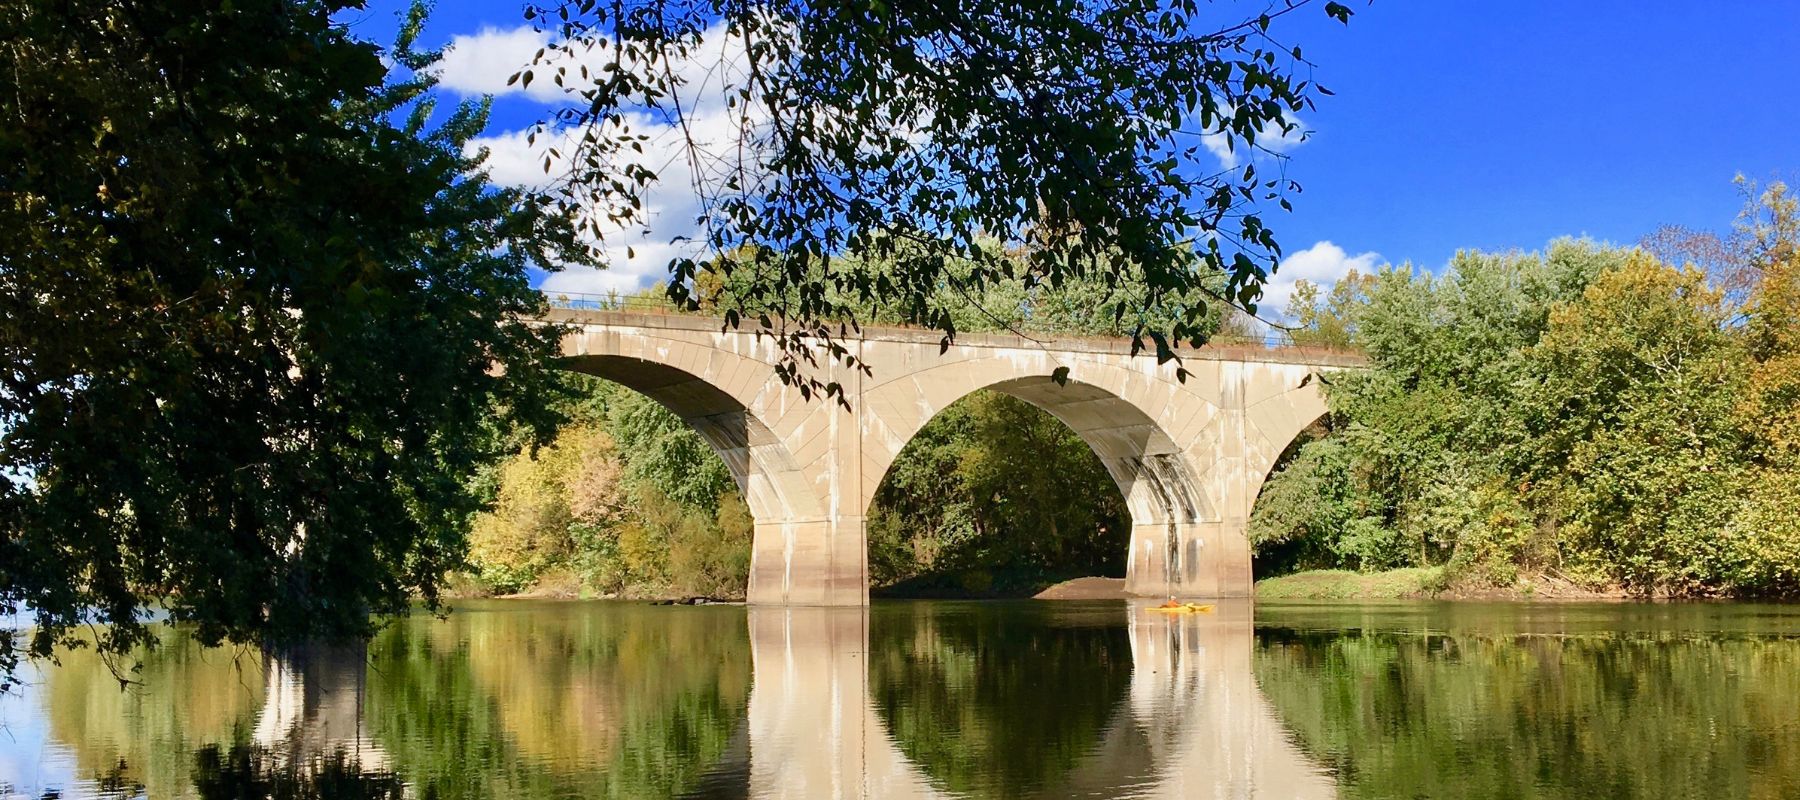 A tranquil scene of an arched stone bridge over a calm river, reflecting the bridge's silhouette. The lush greenery on the banks frames the view, and a clear blue sky above completes this picturesque setting